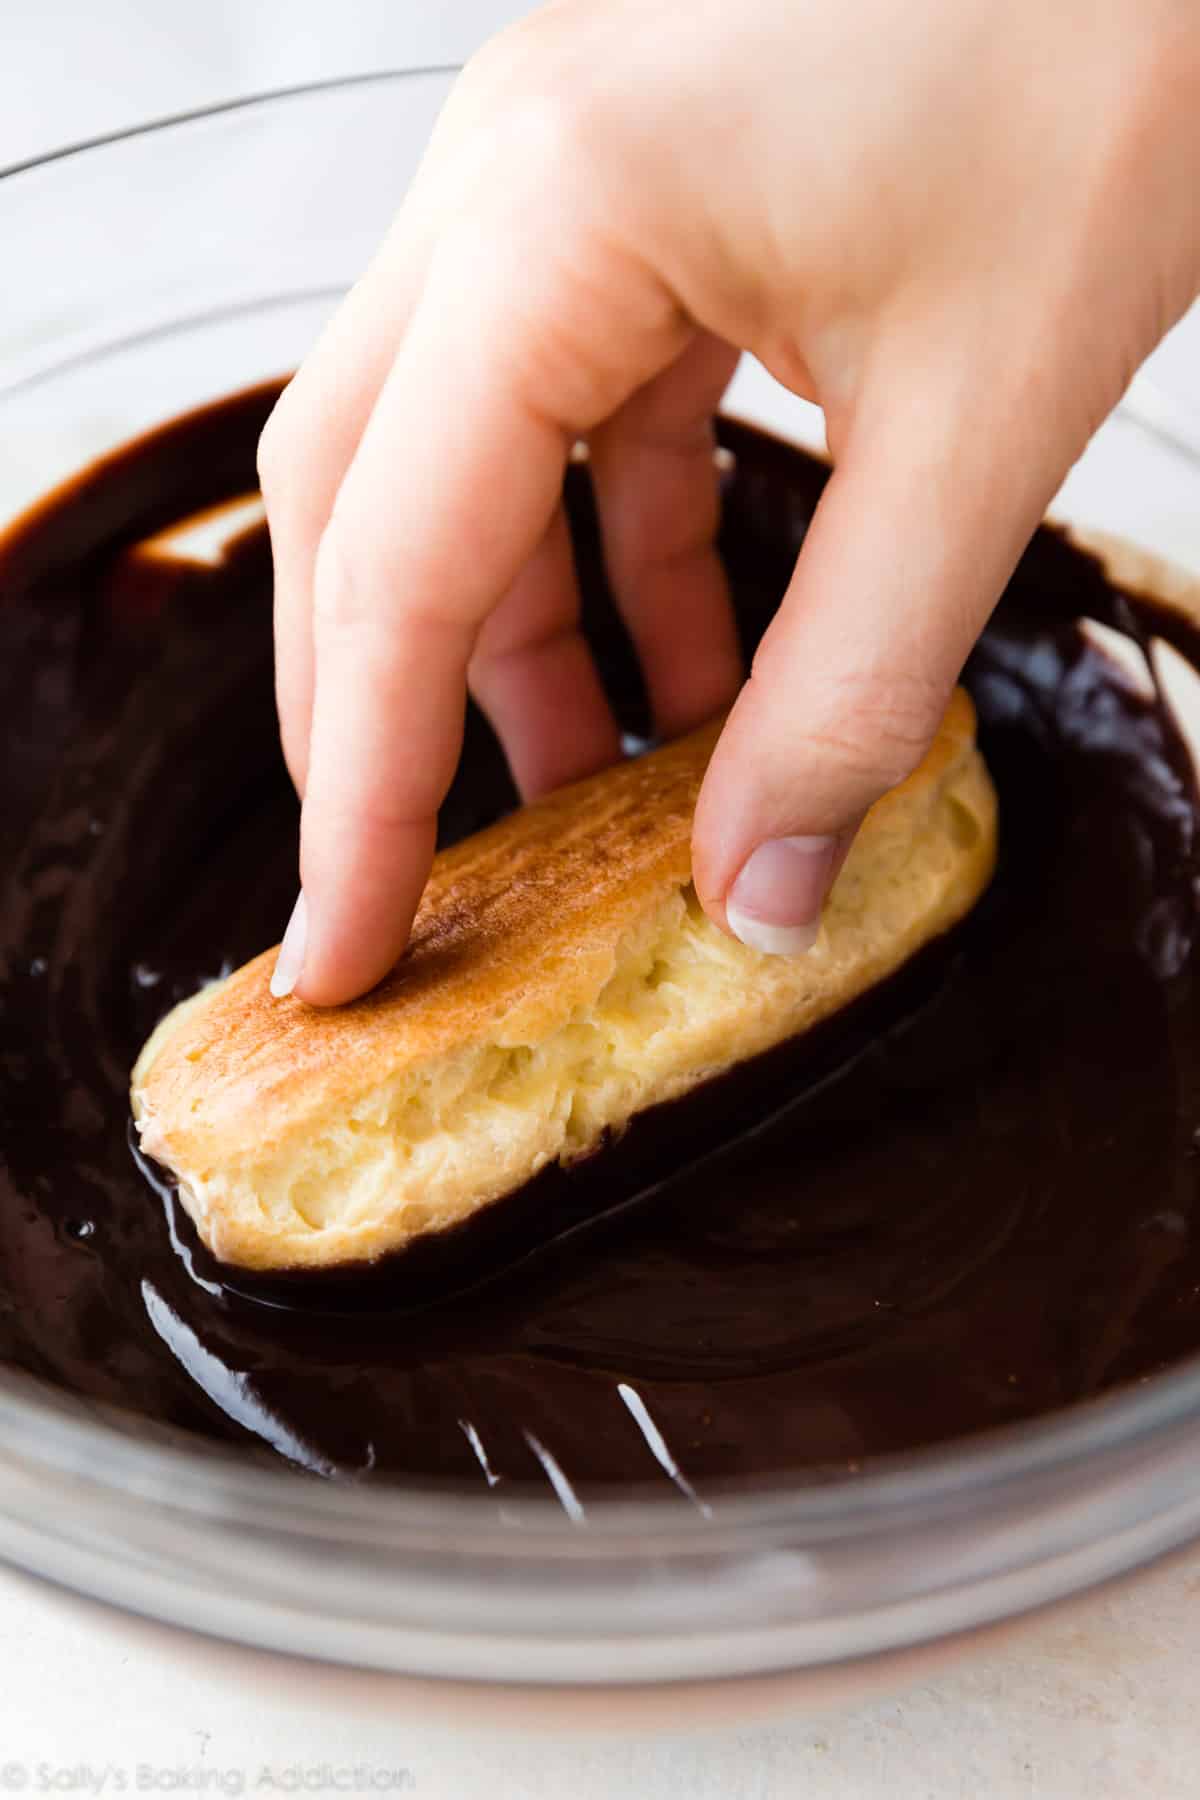 Dipping homemade eclairs into a bowl of chocolate ganache topping